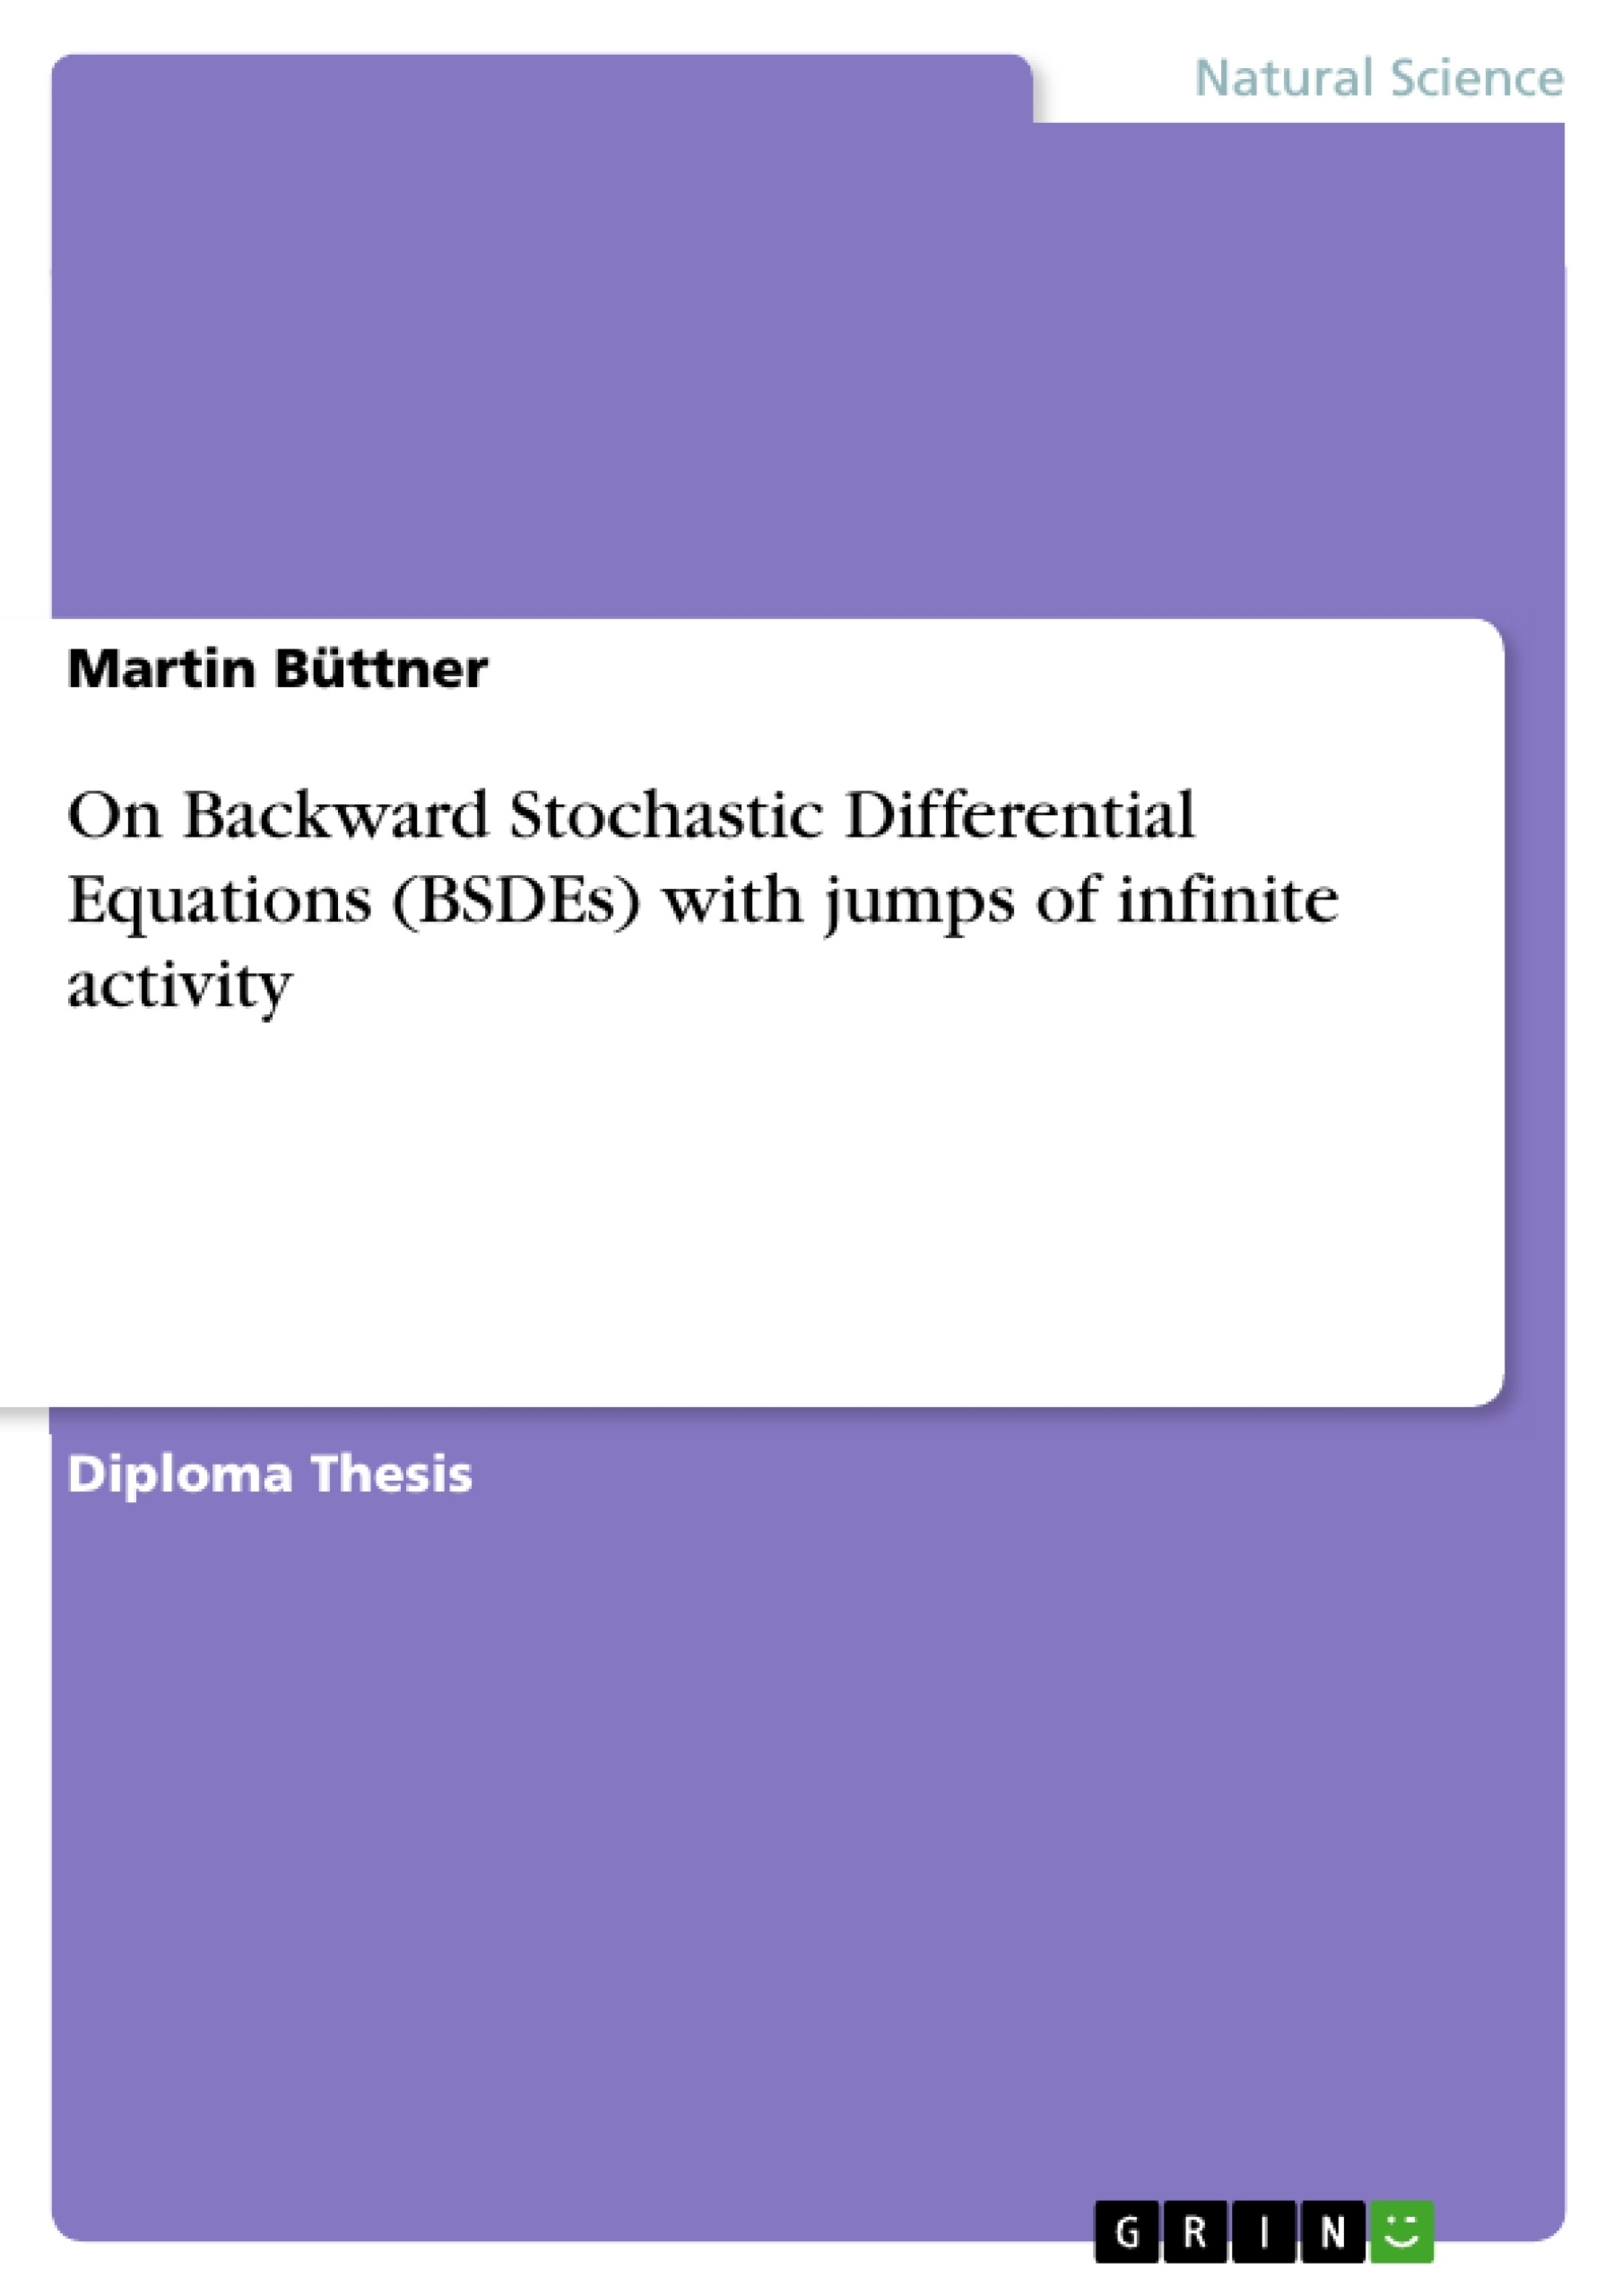 Title: On Backward Stochastic Differential Equations (BSDEs) with jumps of infinite activity